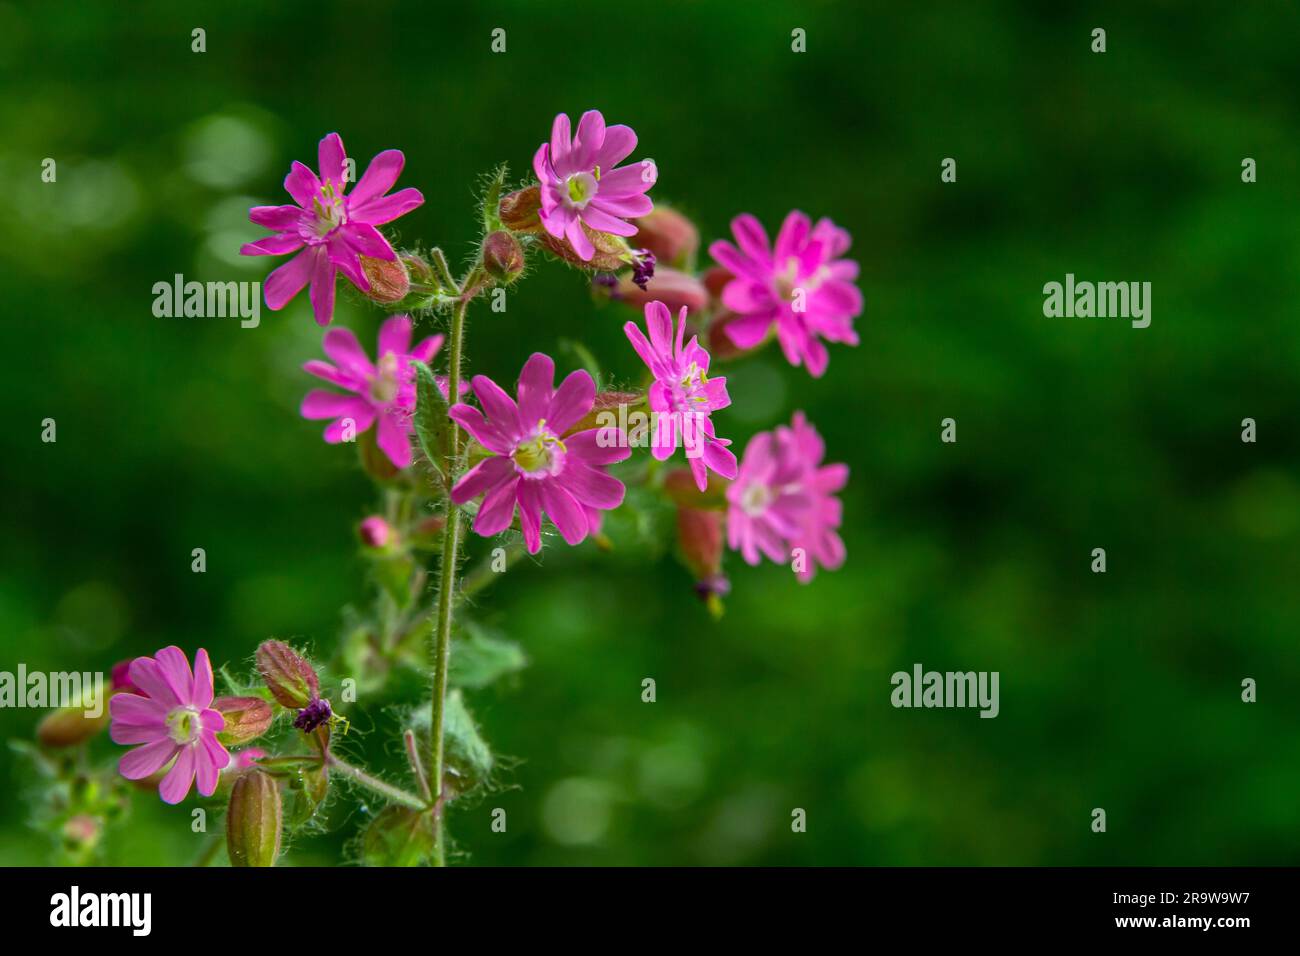 Silene dioica Melandrium rubrum, known as red campion and red catchfly, is a herbaceous flowering plant in the family Caryophyllaceae. Red campion. Stock Photo